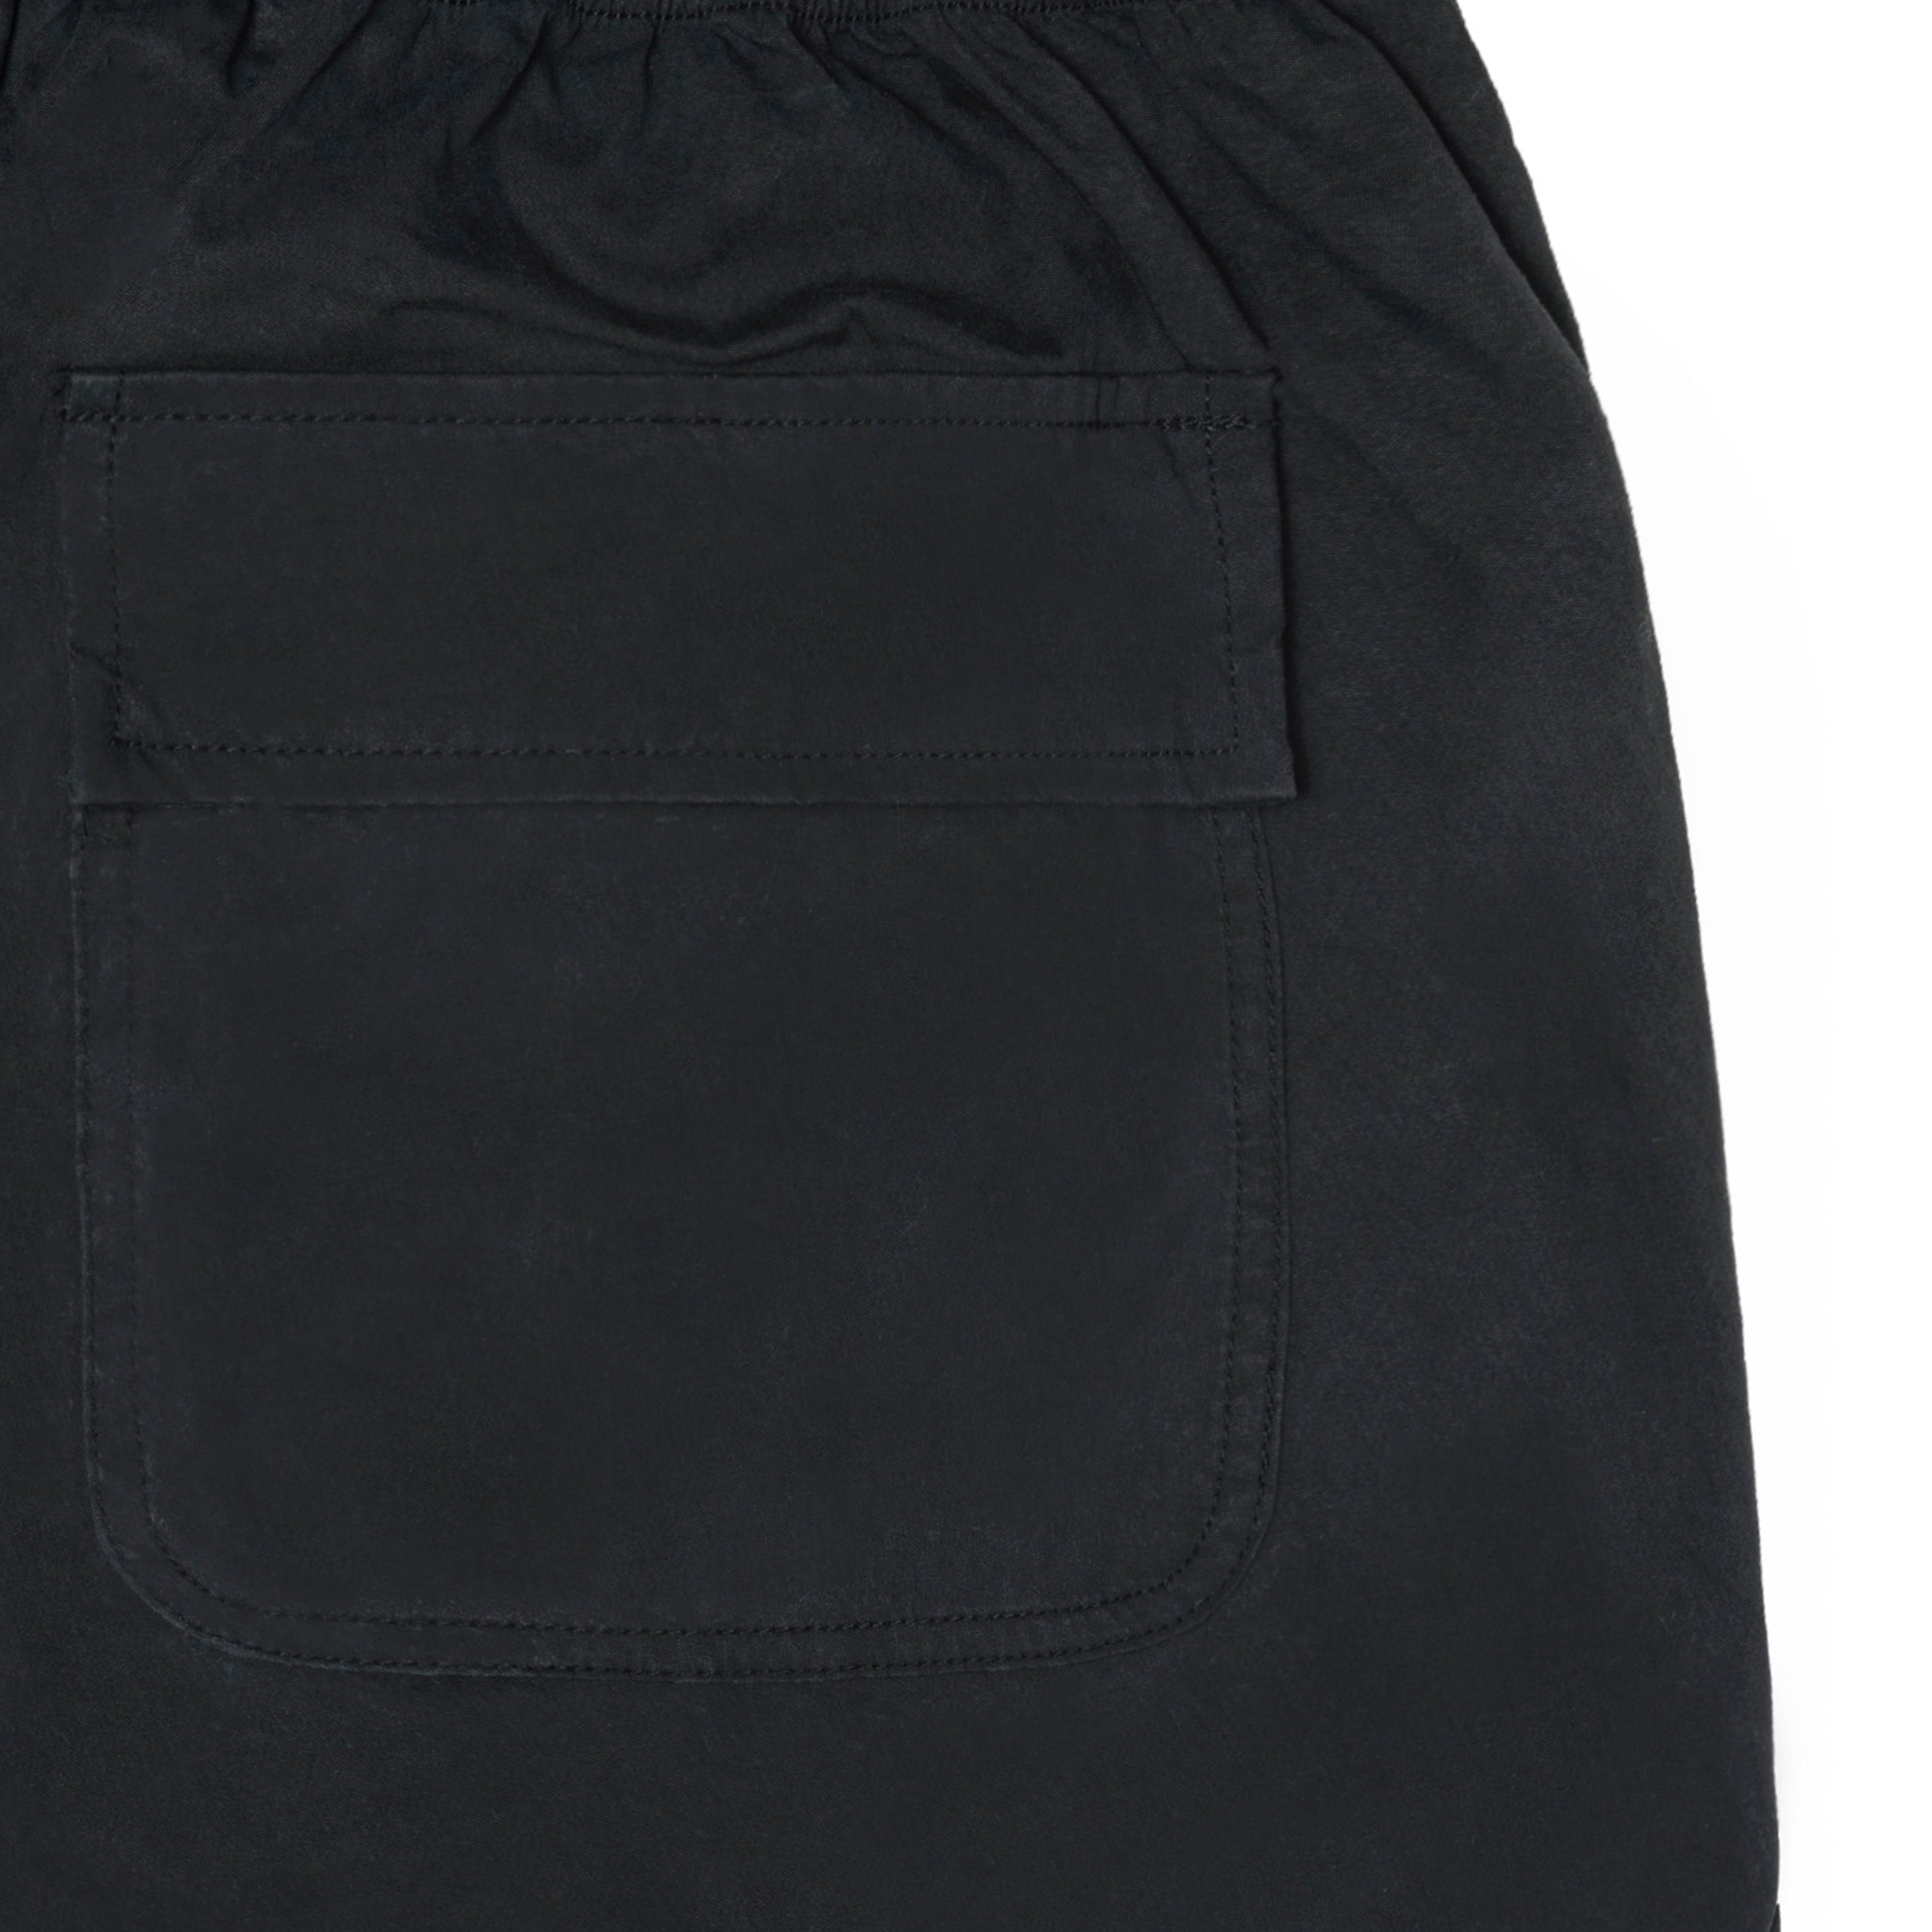 Stüssy - Nyco Over Trousers - (Black)